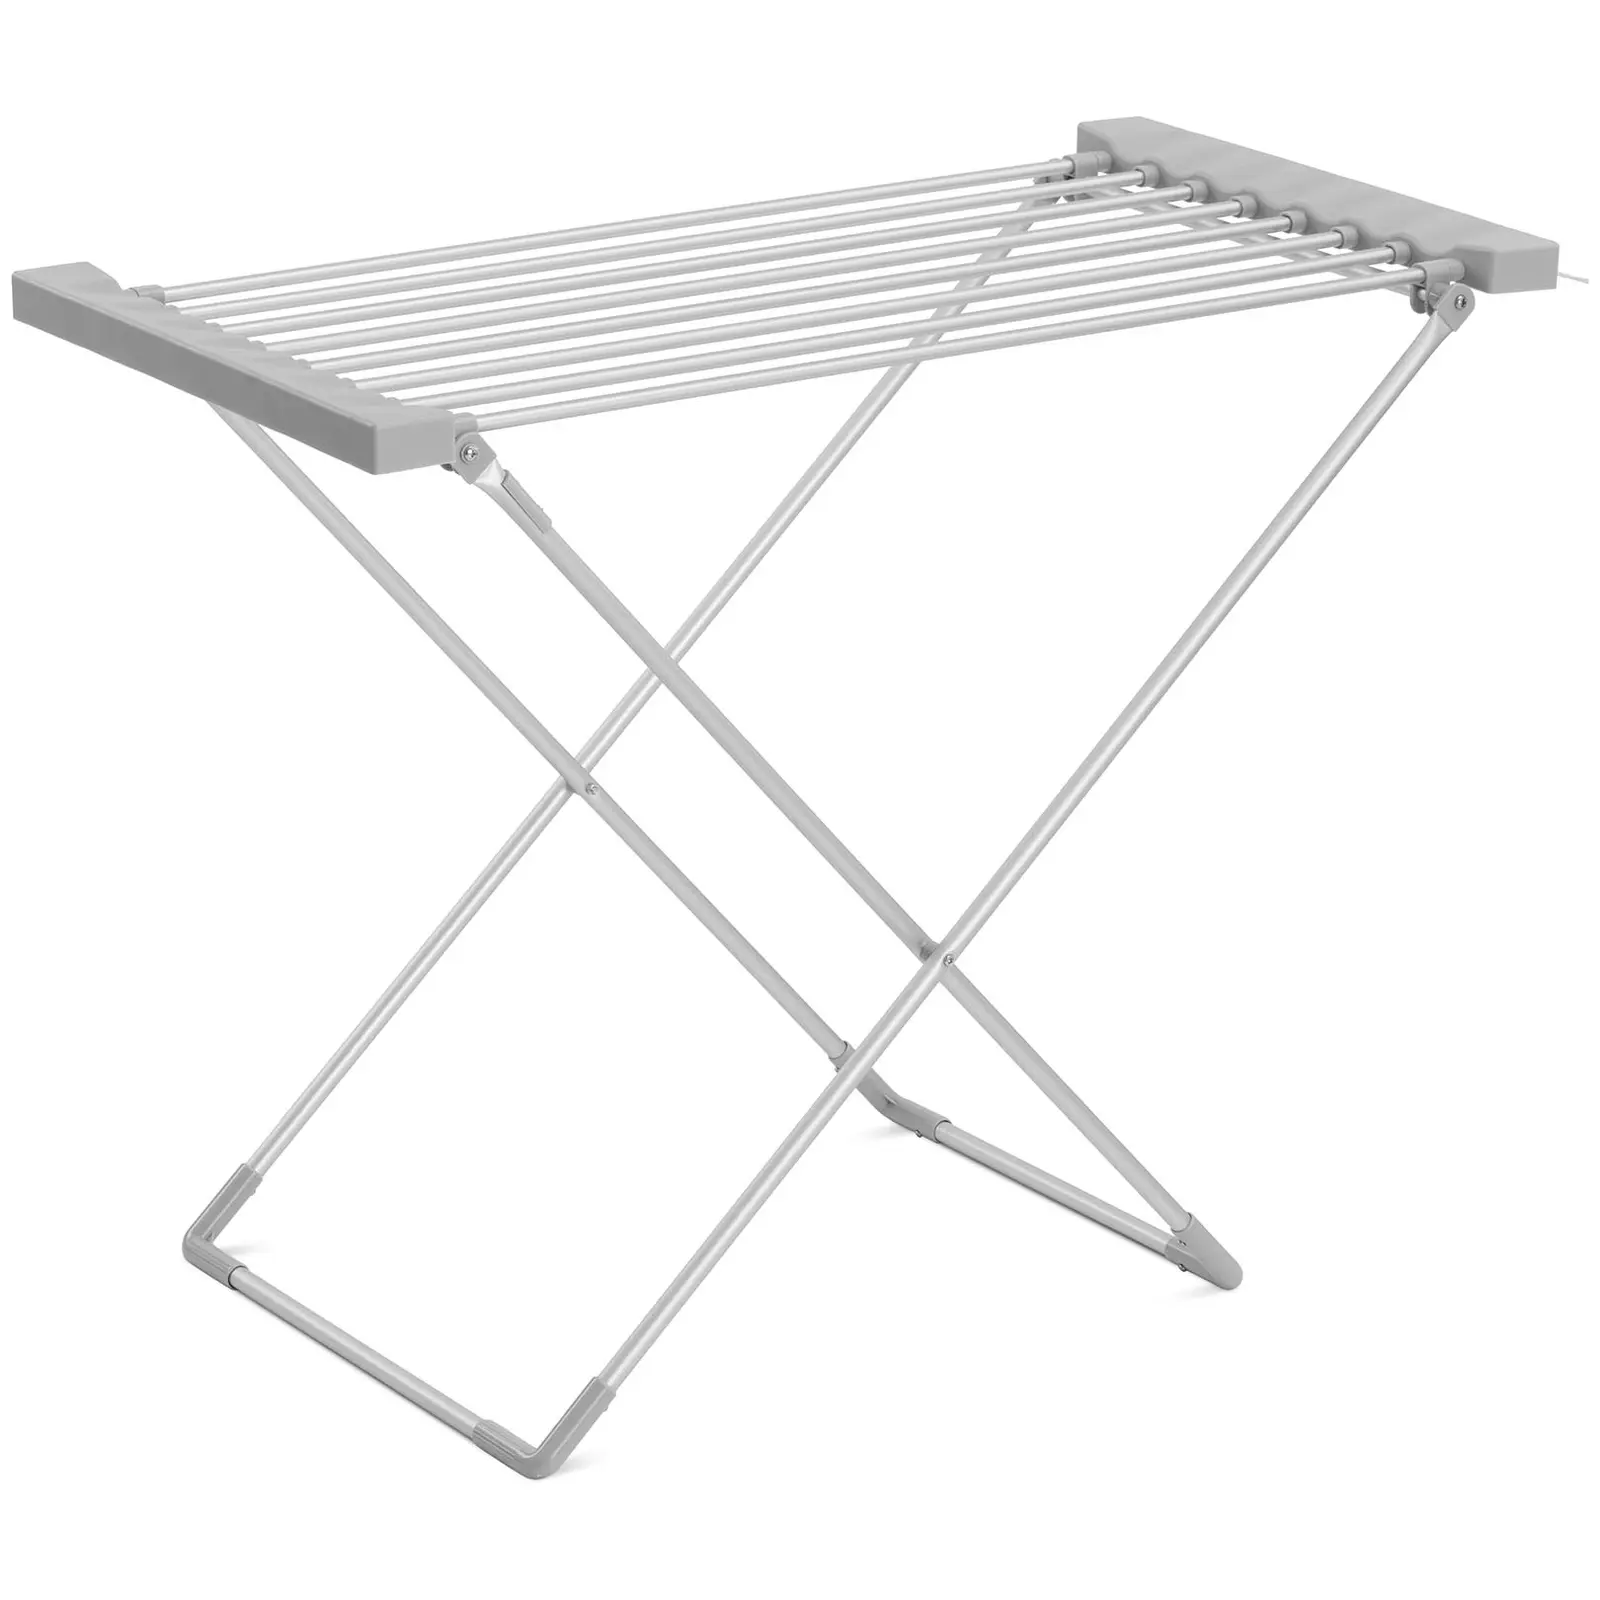 Heatable clothes horse - 8 heating rods